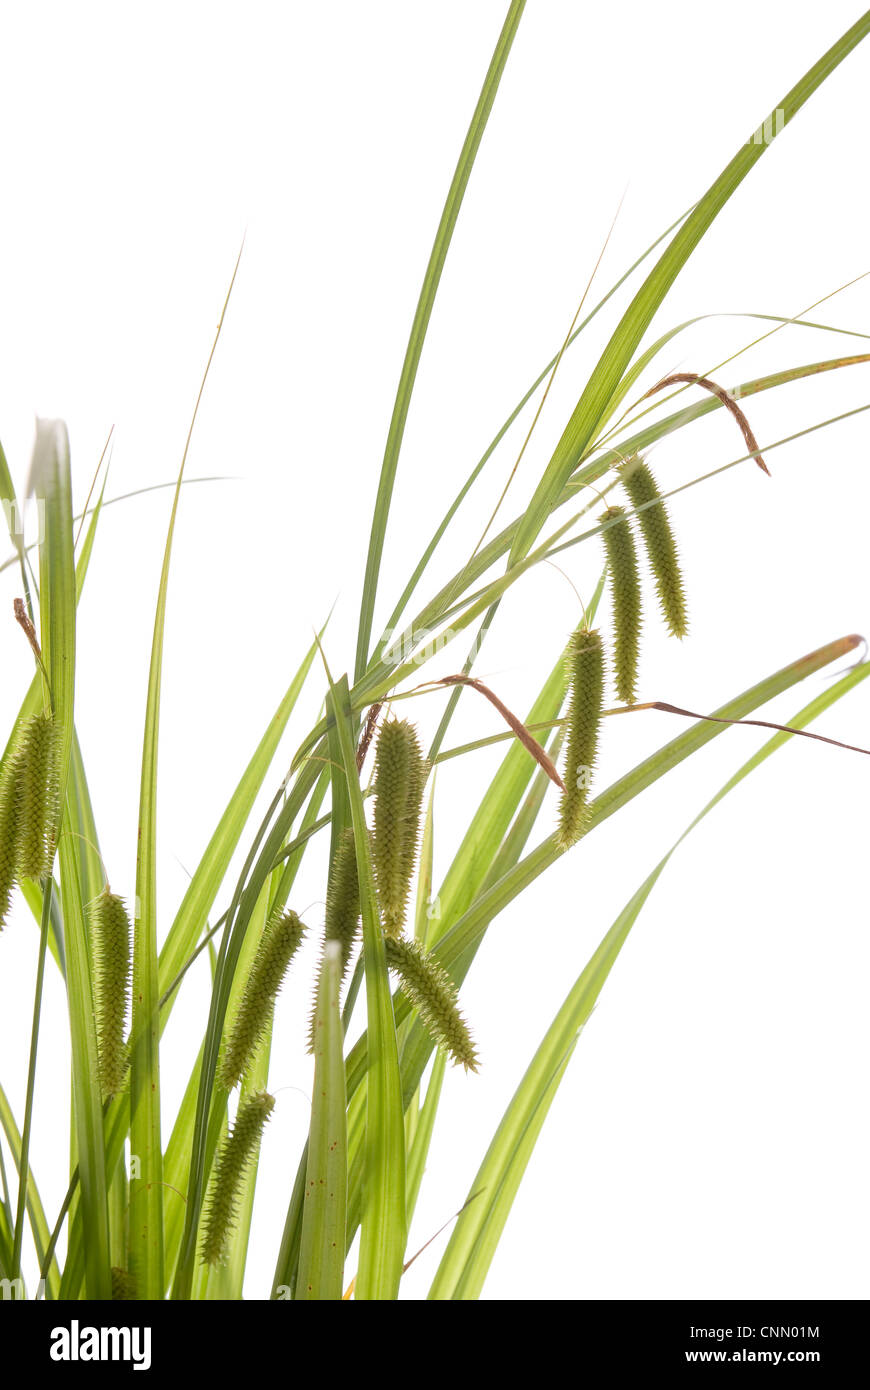 blooming young summer grass on white background Stock Photo